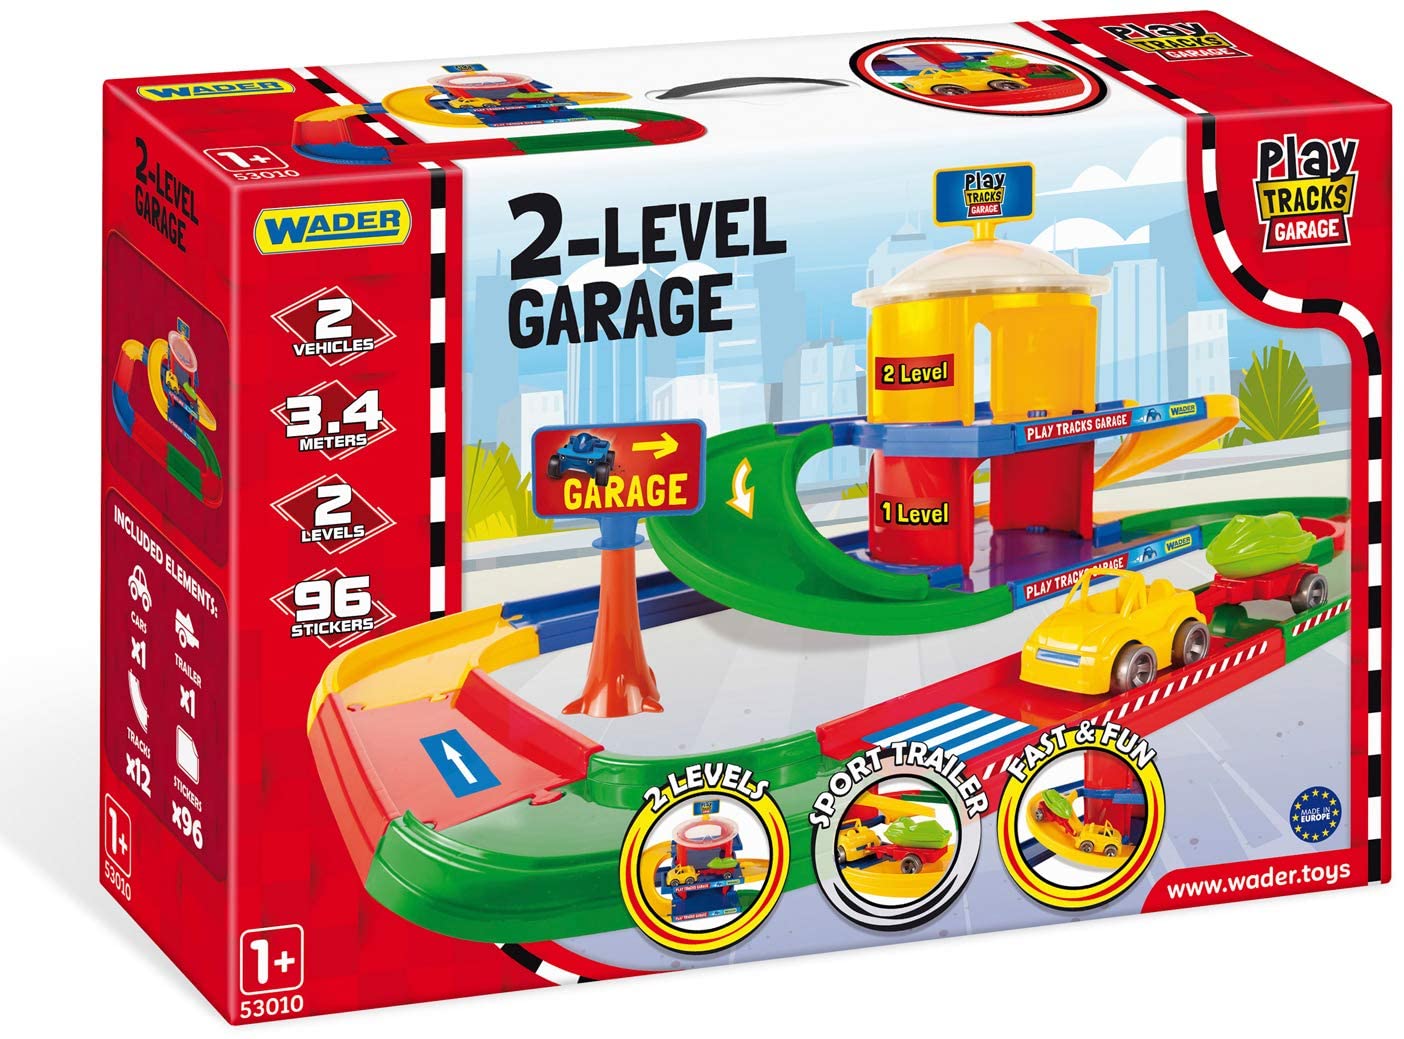 Wader 53010 Play Tracks Garage On Two Levels With Vehicle And 3.4 M Play Ro